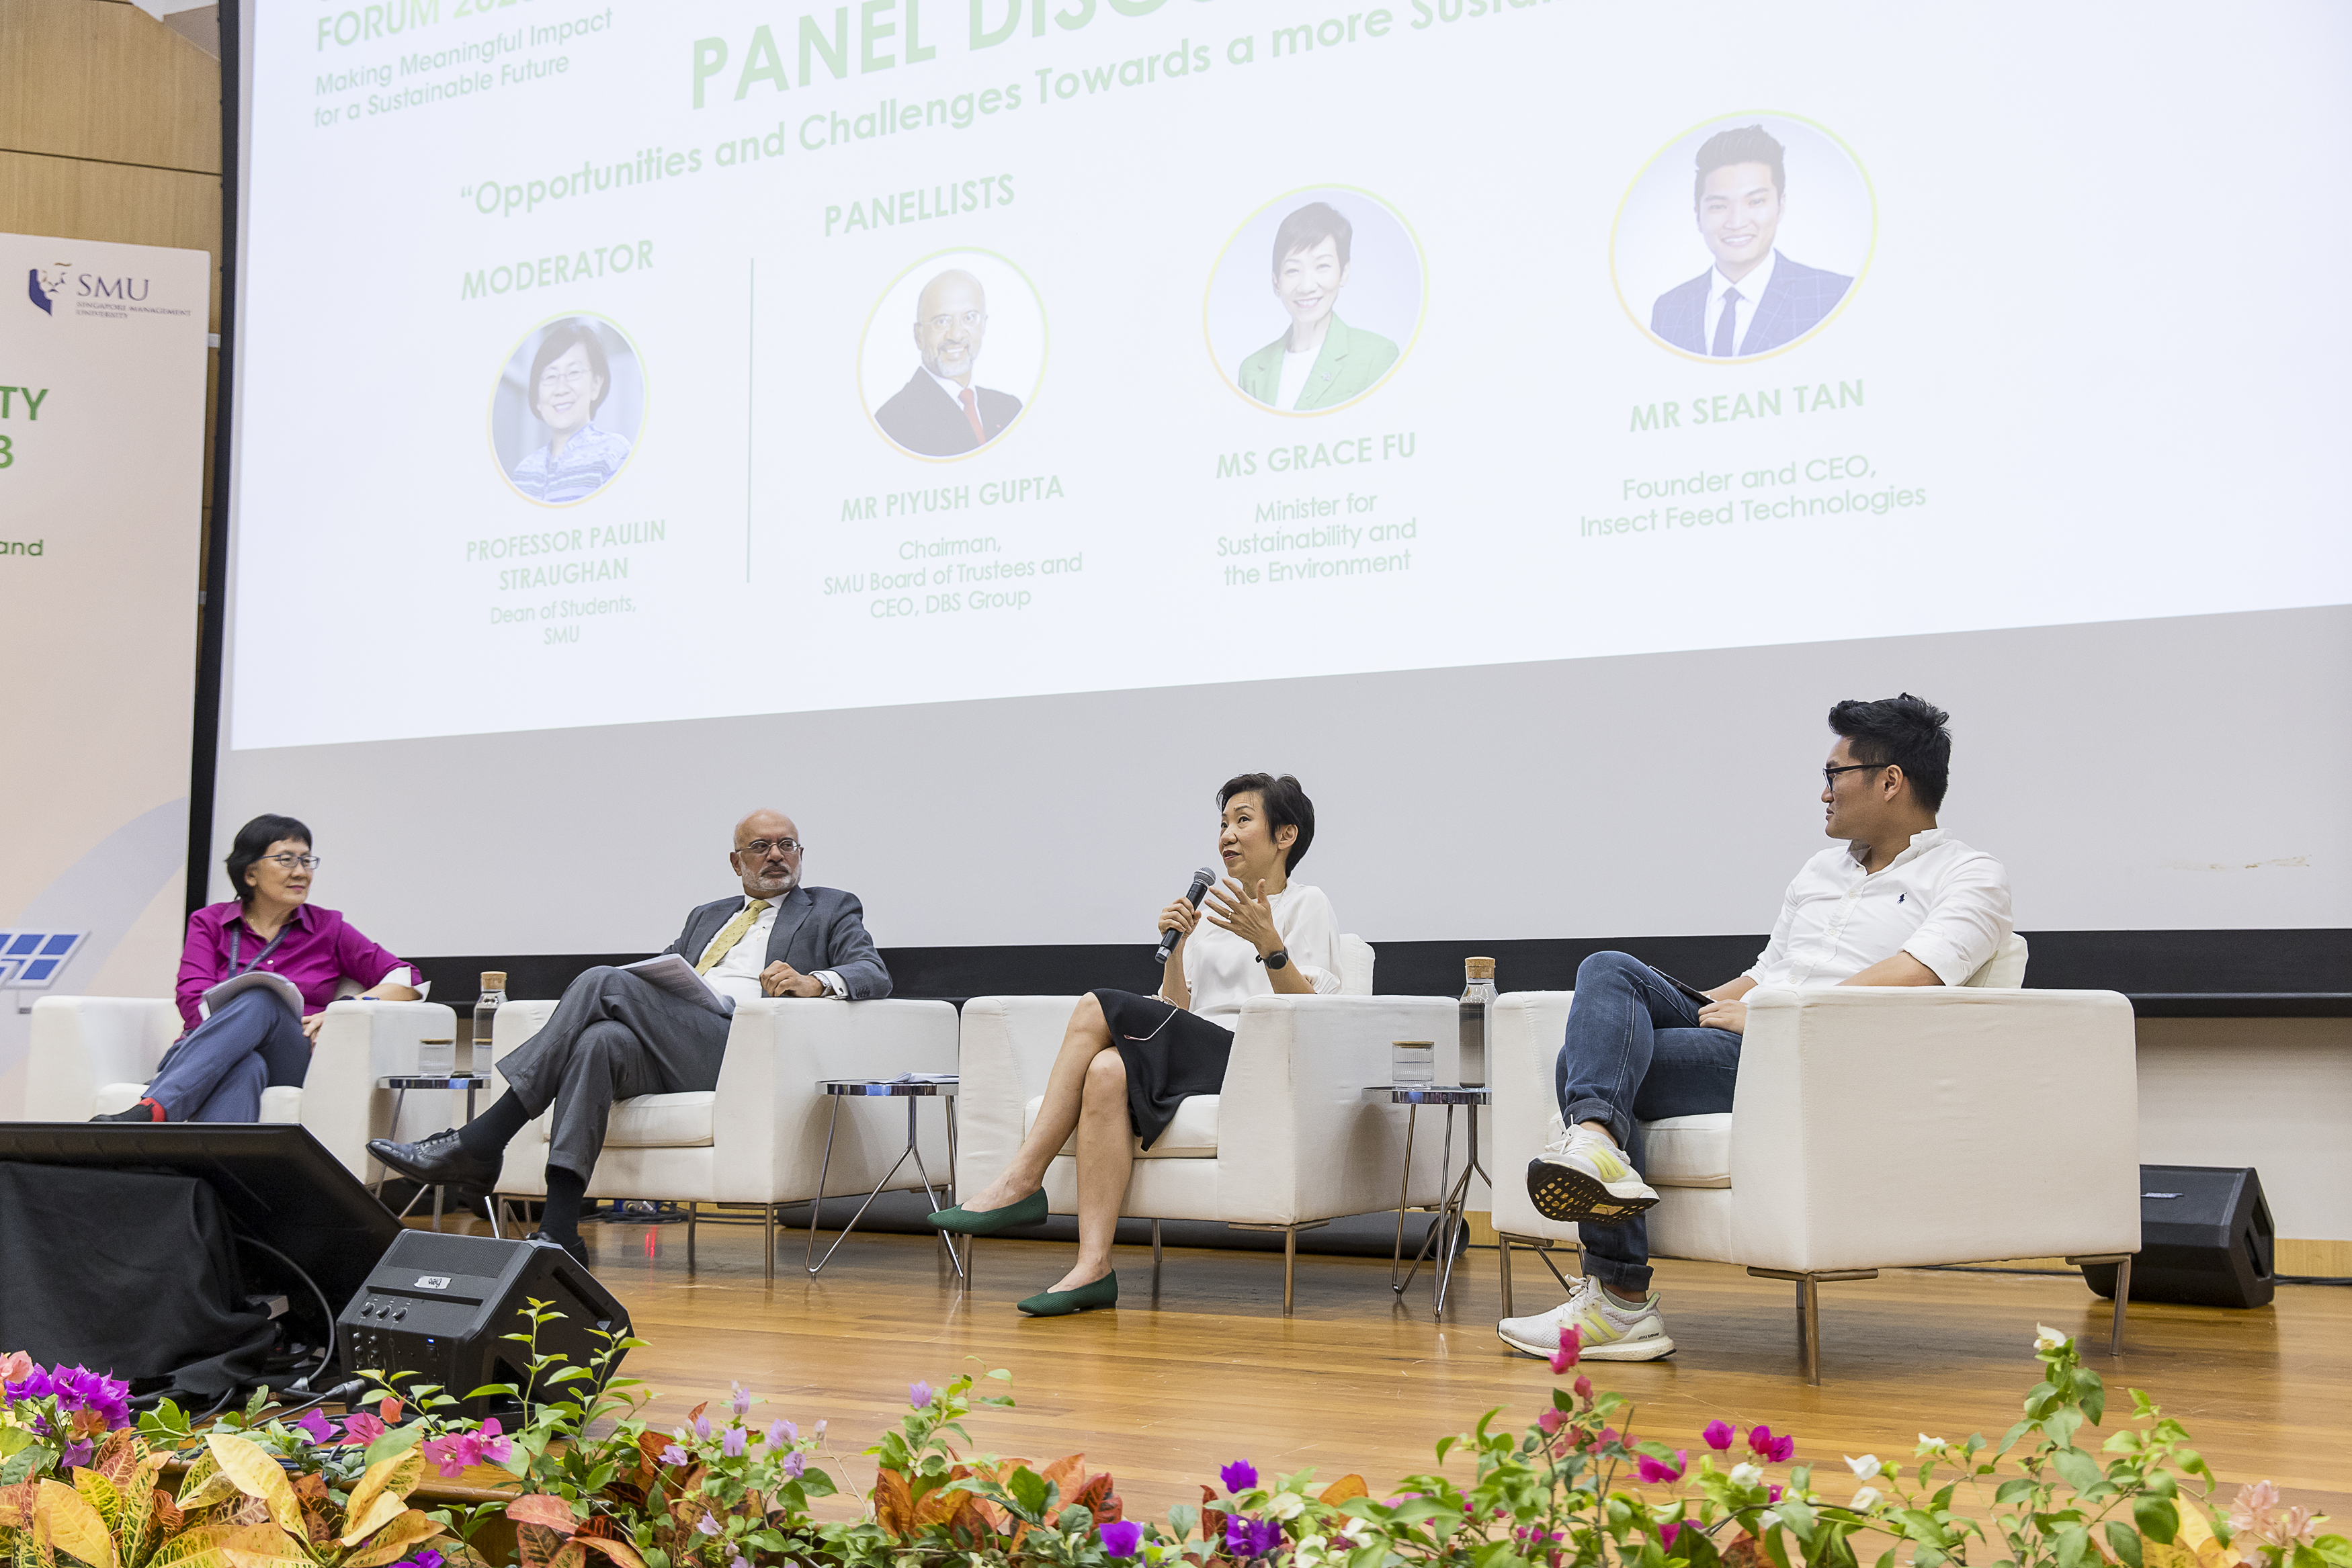 (L-R) Panel Moderator – SMU Dean of Students Prof Paulin Straughan and panellists - SMU Chairman Mr Piyush Gupta, Minister for Sustainability and the Environment Ms Grace Fu and Founder & CEO of Insect Feed Technologies Mr Sean Tan.